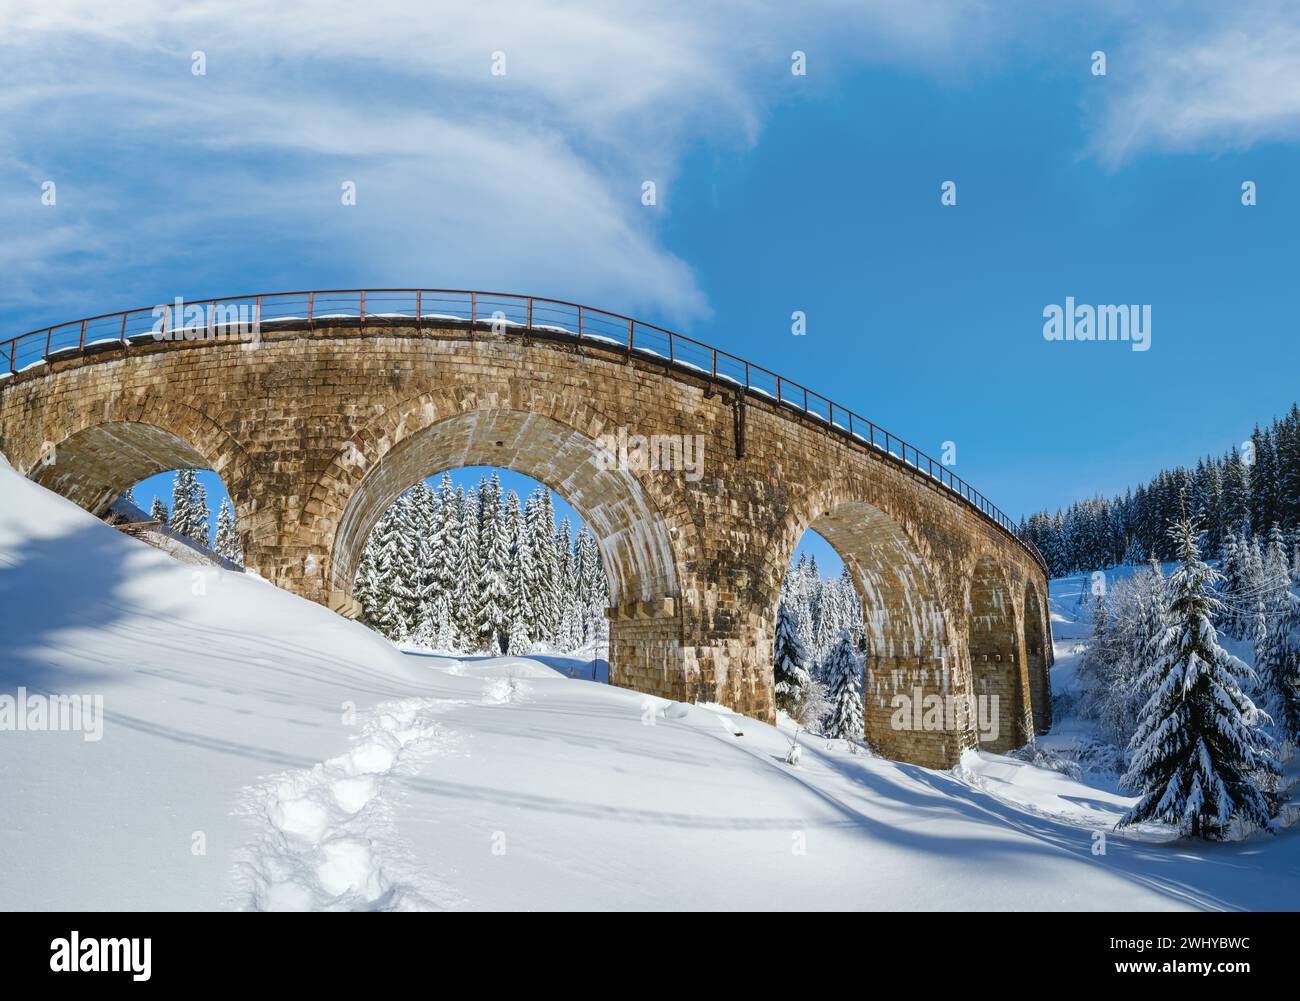 Stone viaduct (arch bridge) on railway through mountain snowy fir forest. Snow drifts  on wayside and hoarfrost on trees and ele Stock Photo